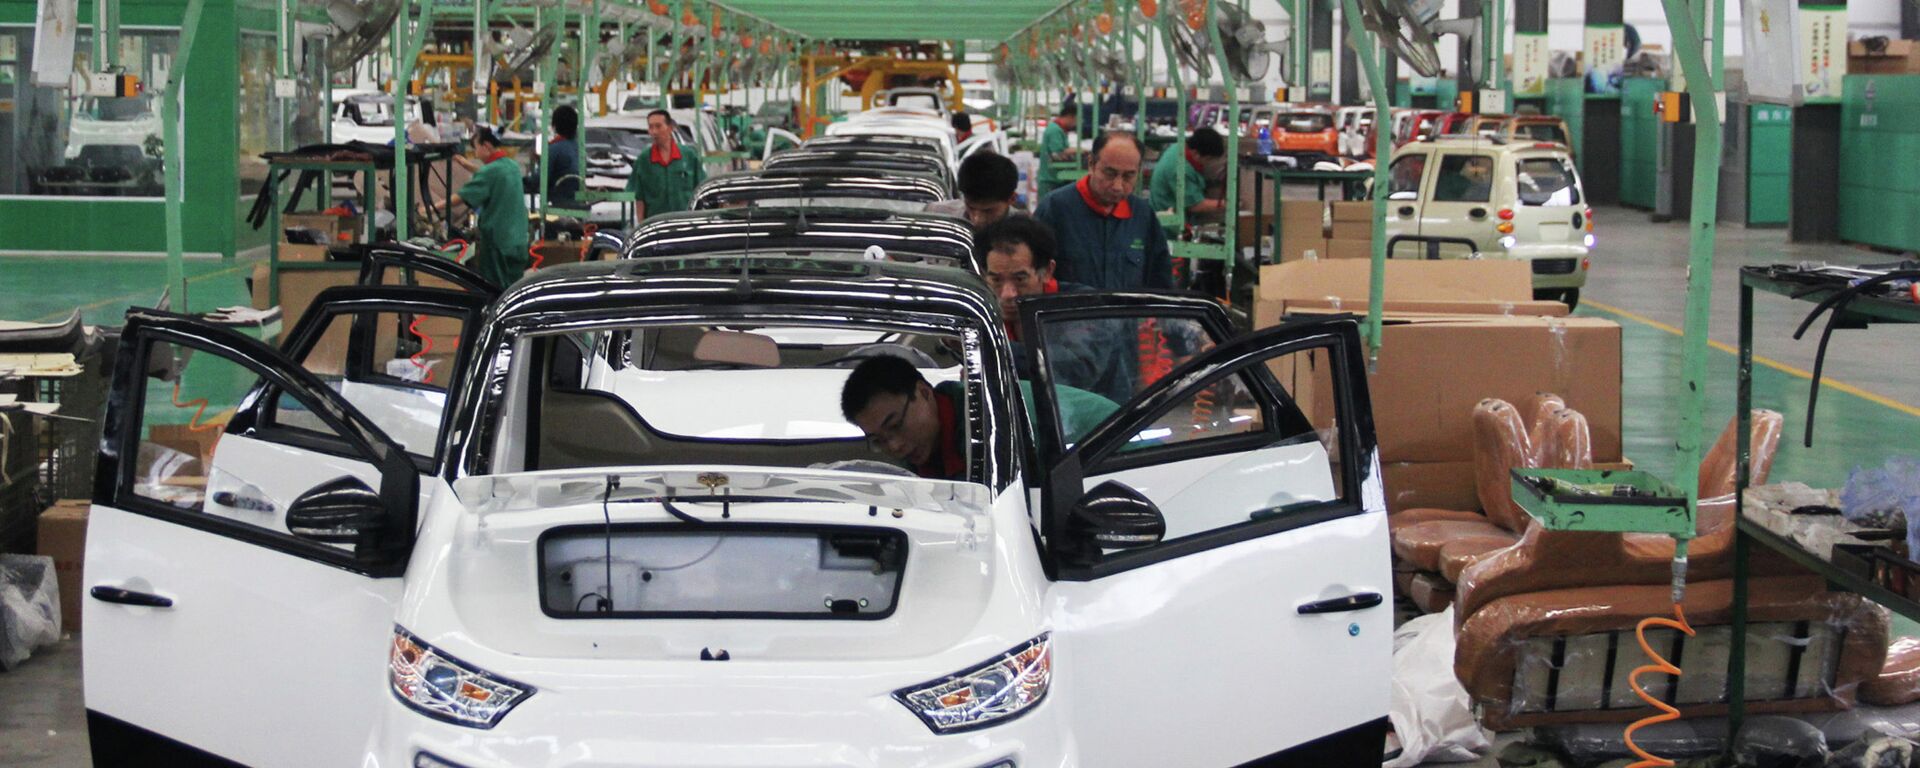 Workers assemble electric cars in a factory in Zouping, east China's Shandong province on September 16, 2014  - Sputnik International, 1920, 30.06.2021